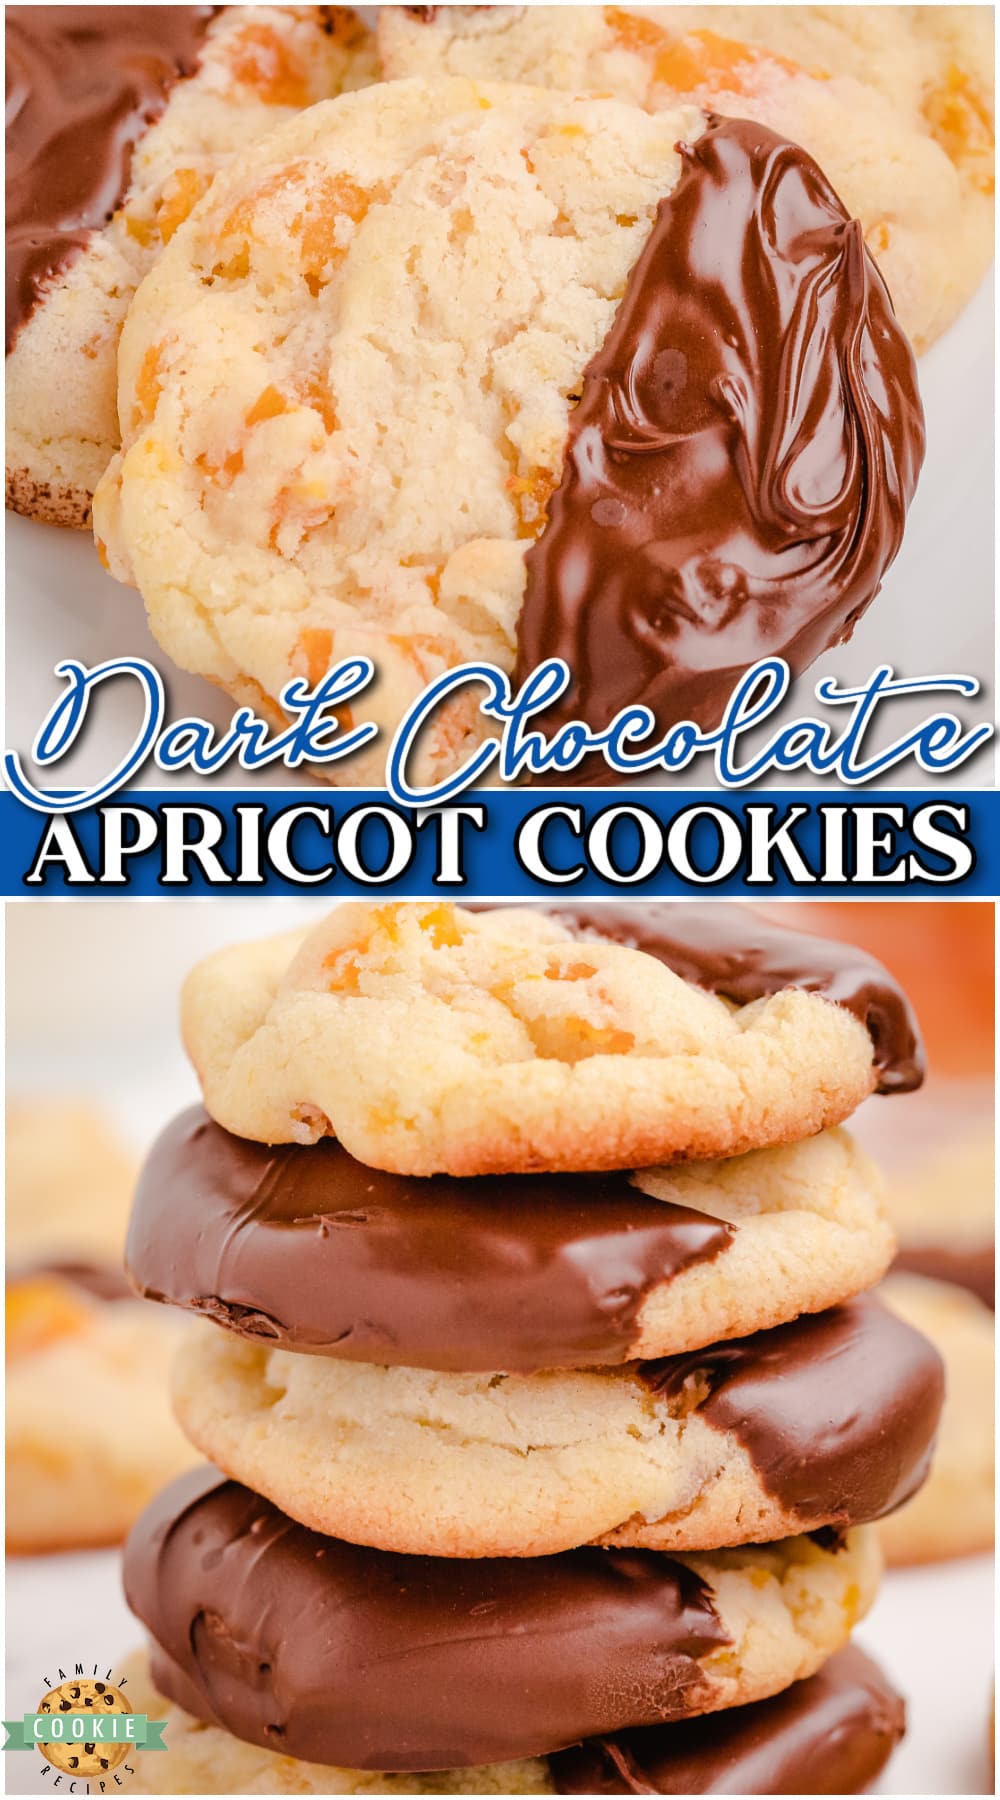 Easy Apricot Cookies perfectly combine a sweet cookie base with tangy fruit flavor. These apricot sugar cookies are dipped in dark chocolate & are simply delightful! via @buttergirls